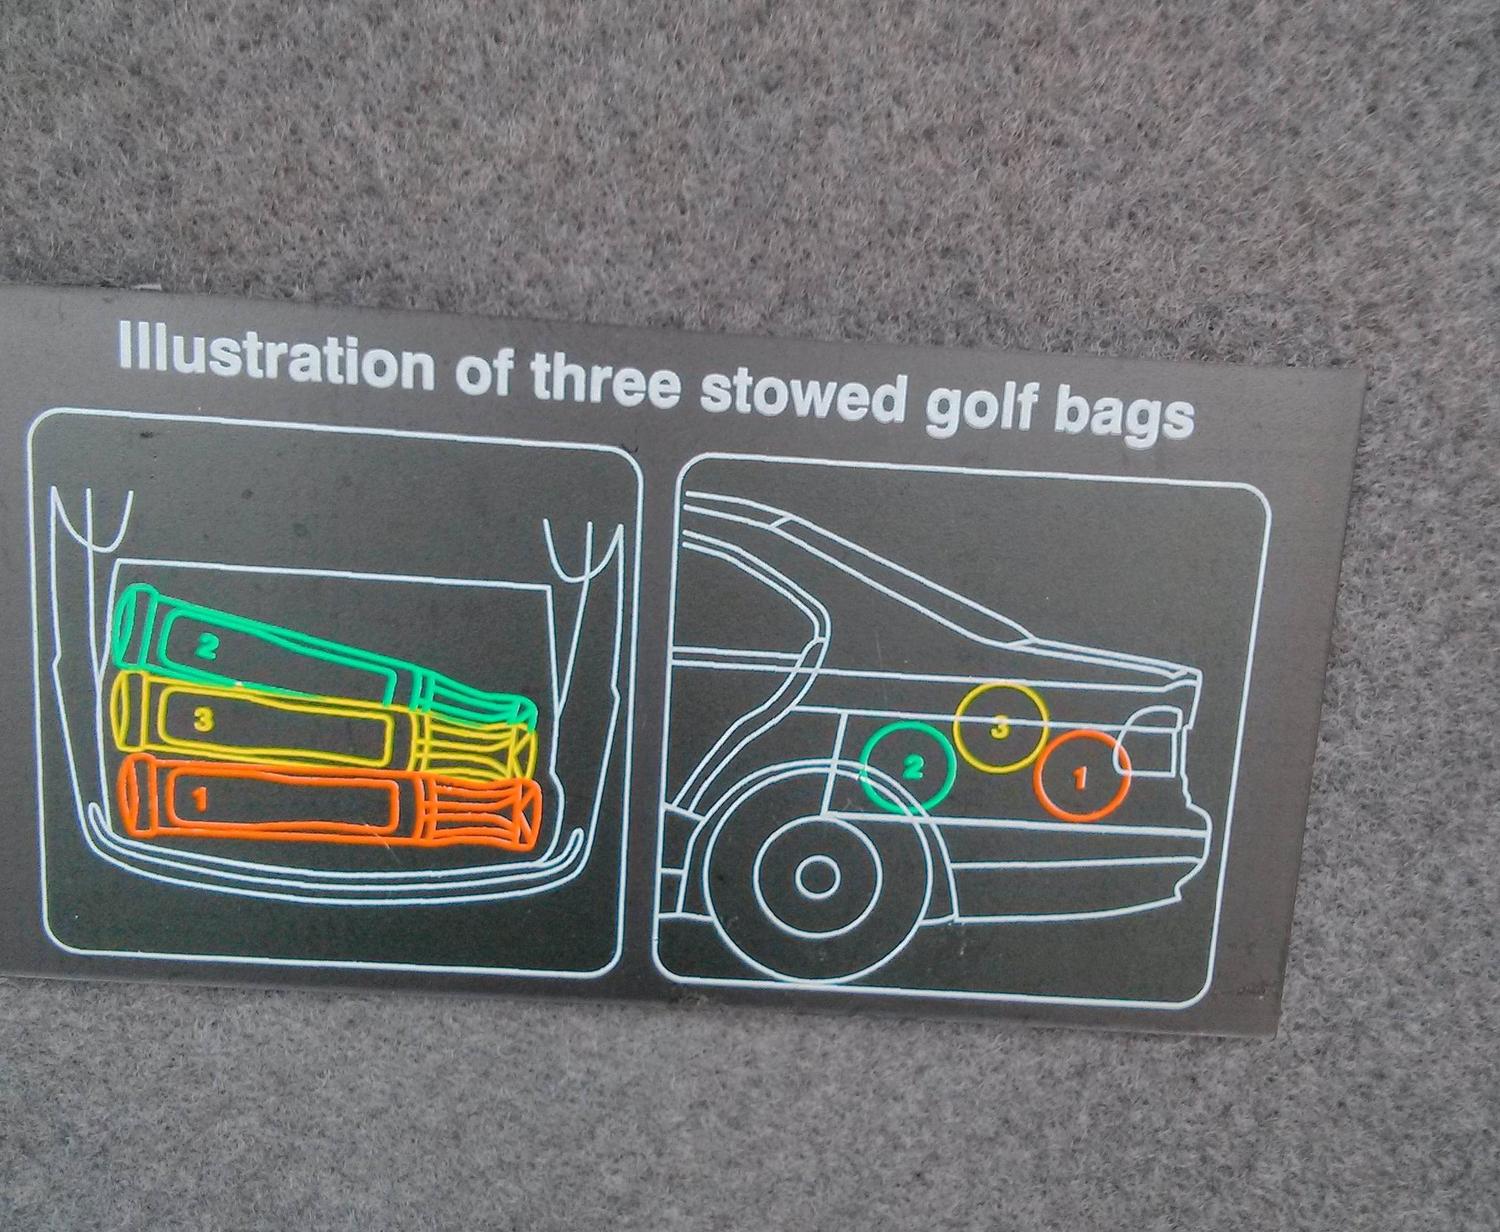 I found this diagram in the trunk of a BMW. First world problem averted!